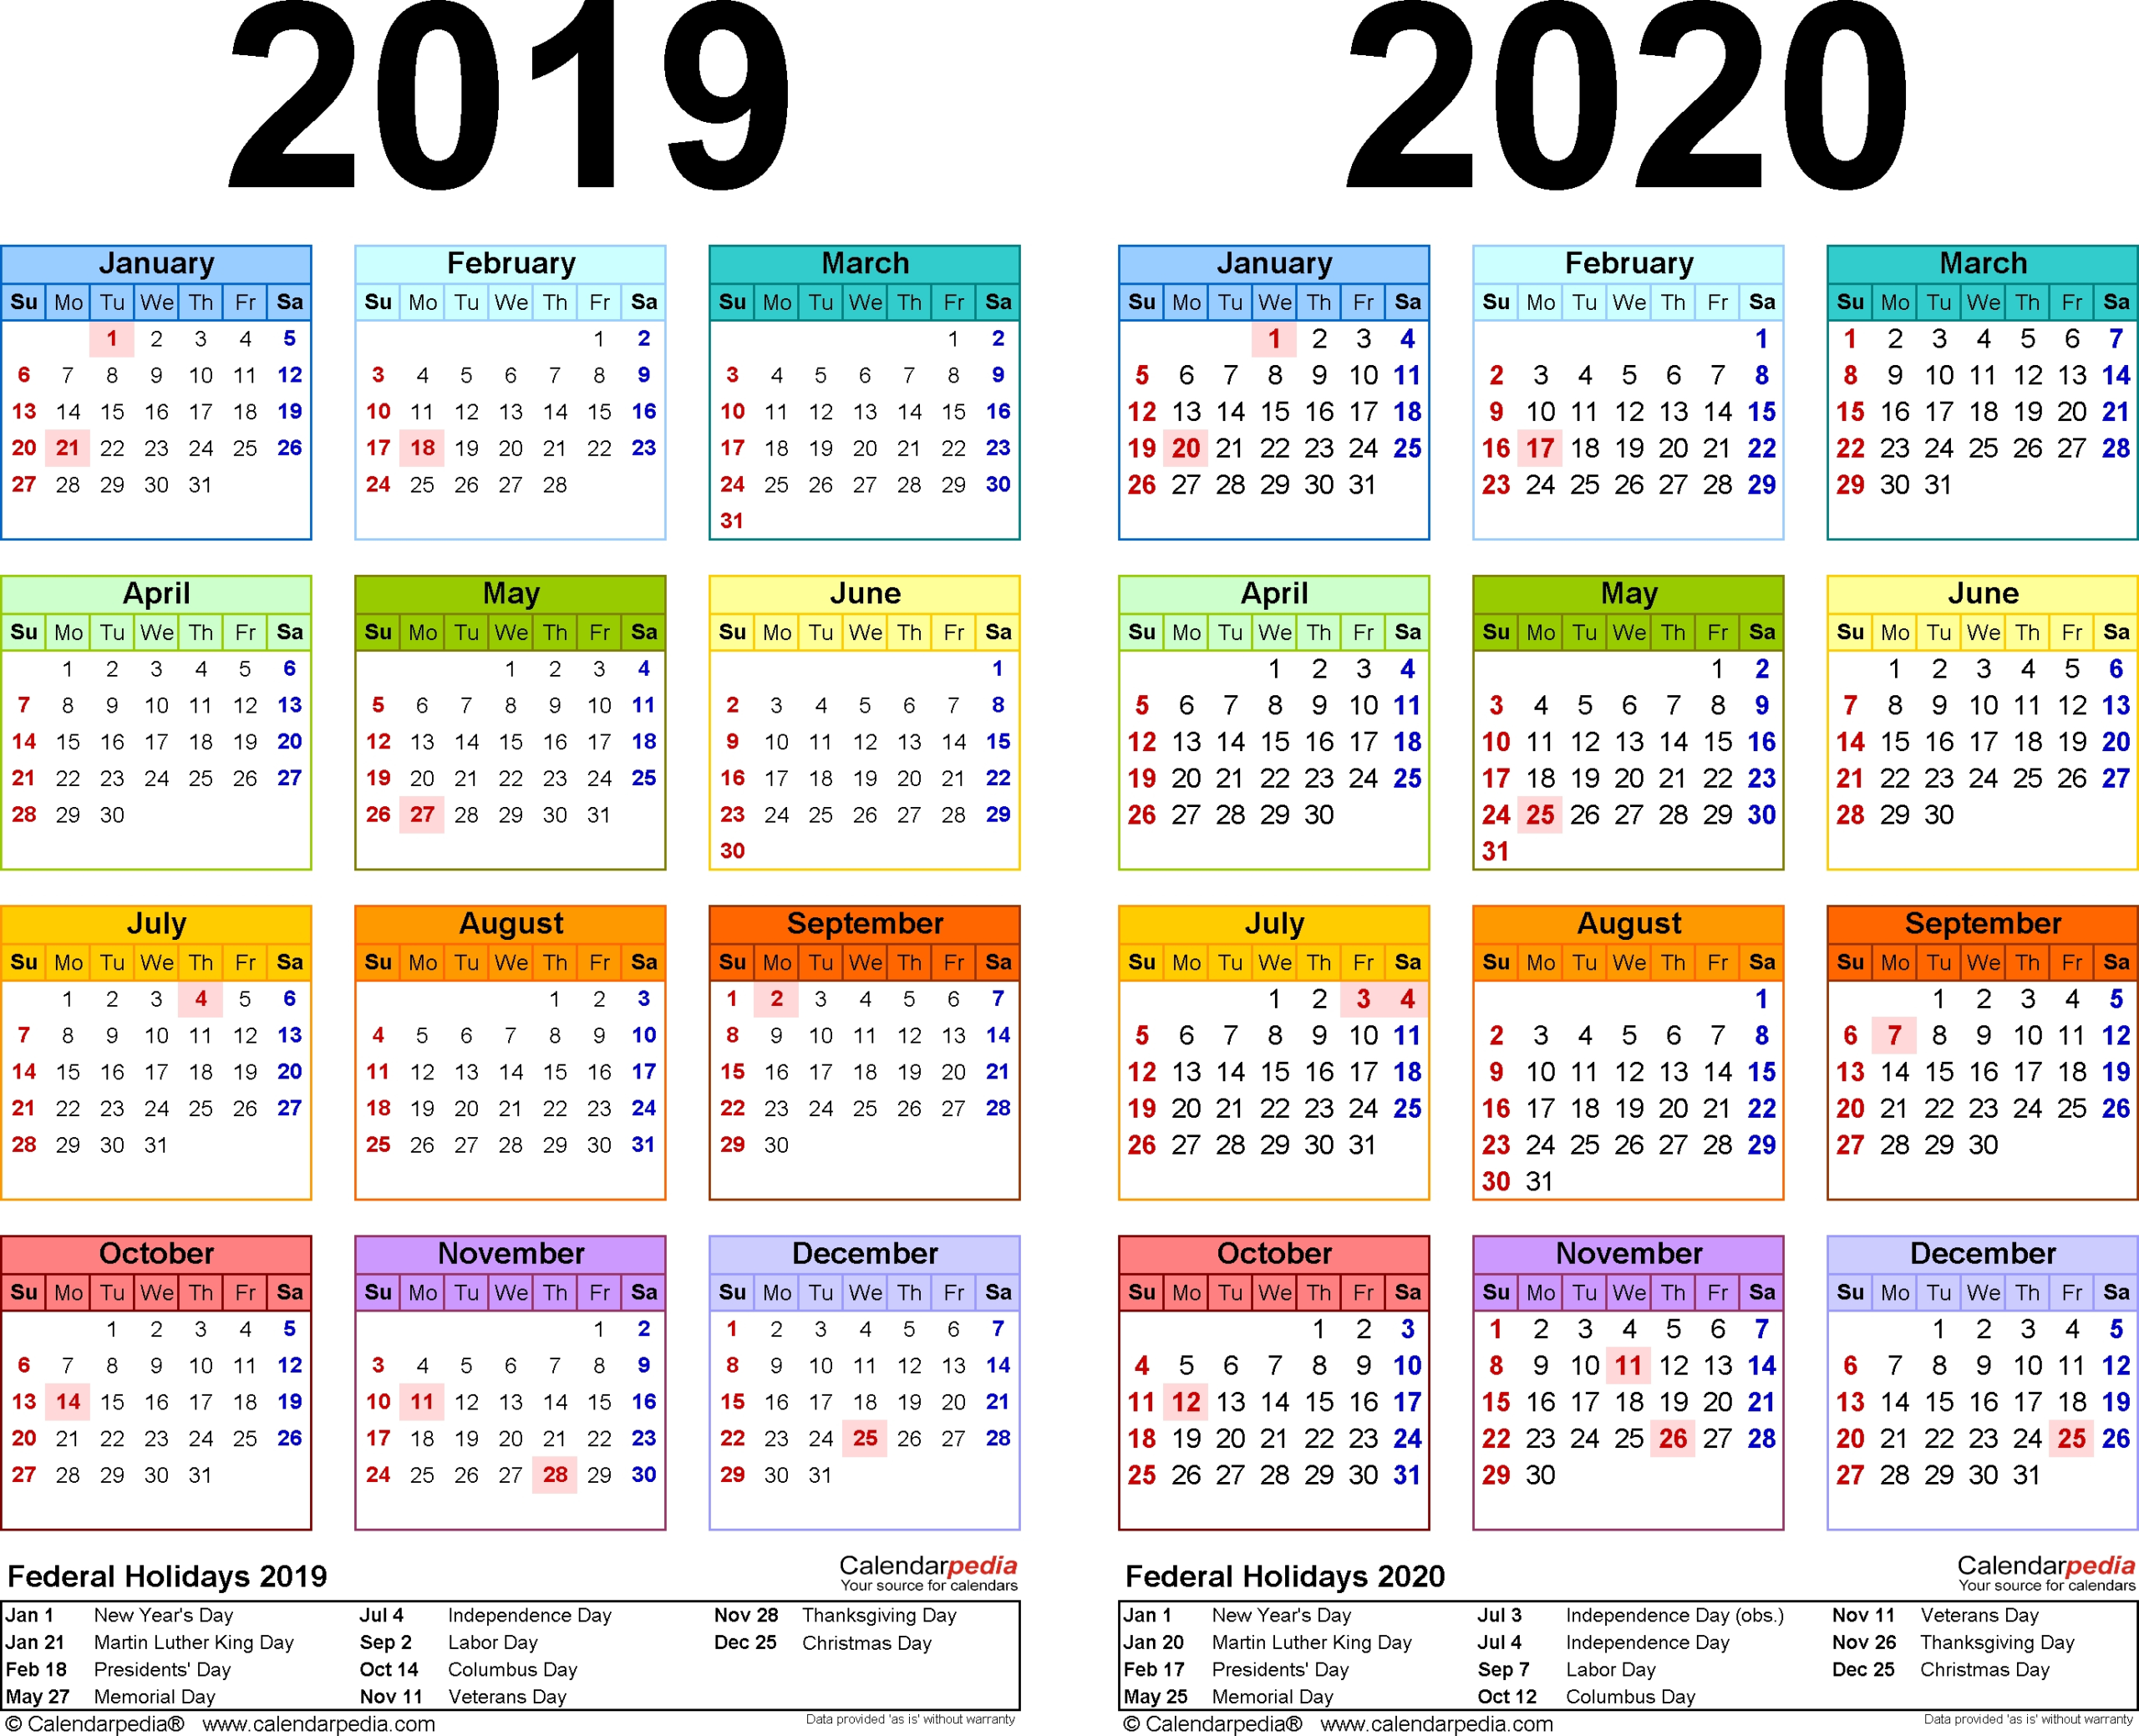 A4 Yearly Calendars For 2019 And 2020 - Calendar